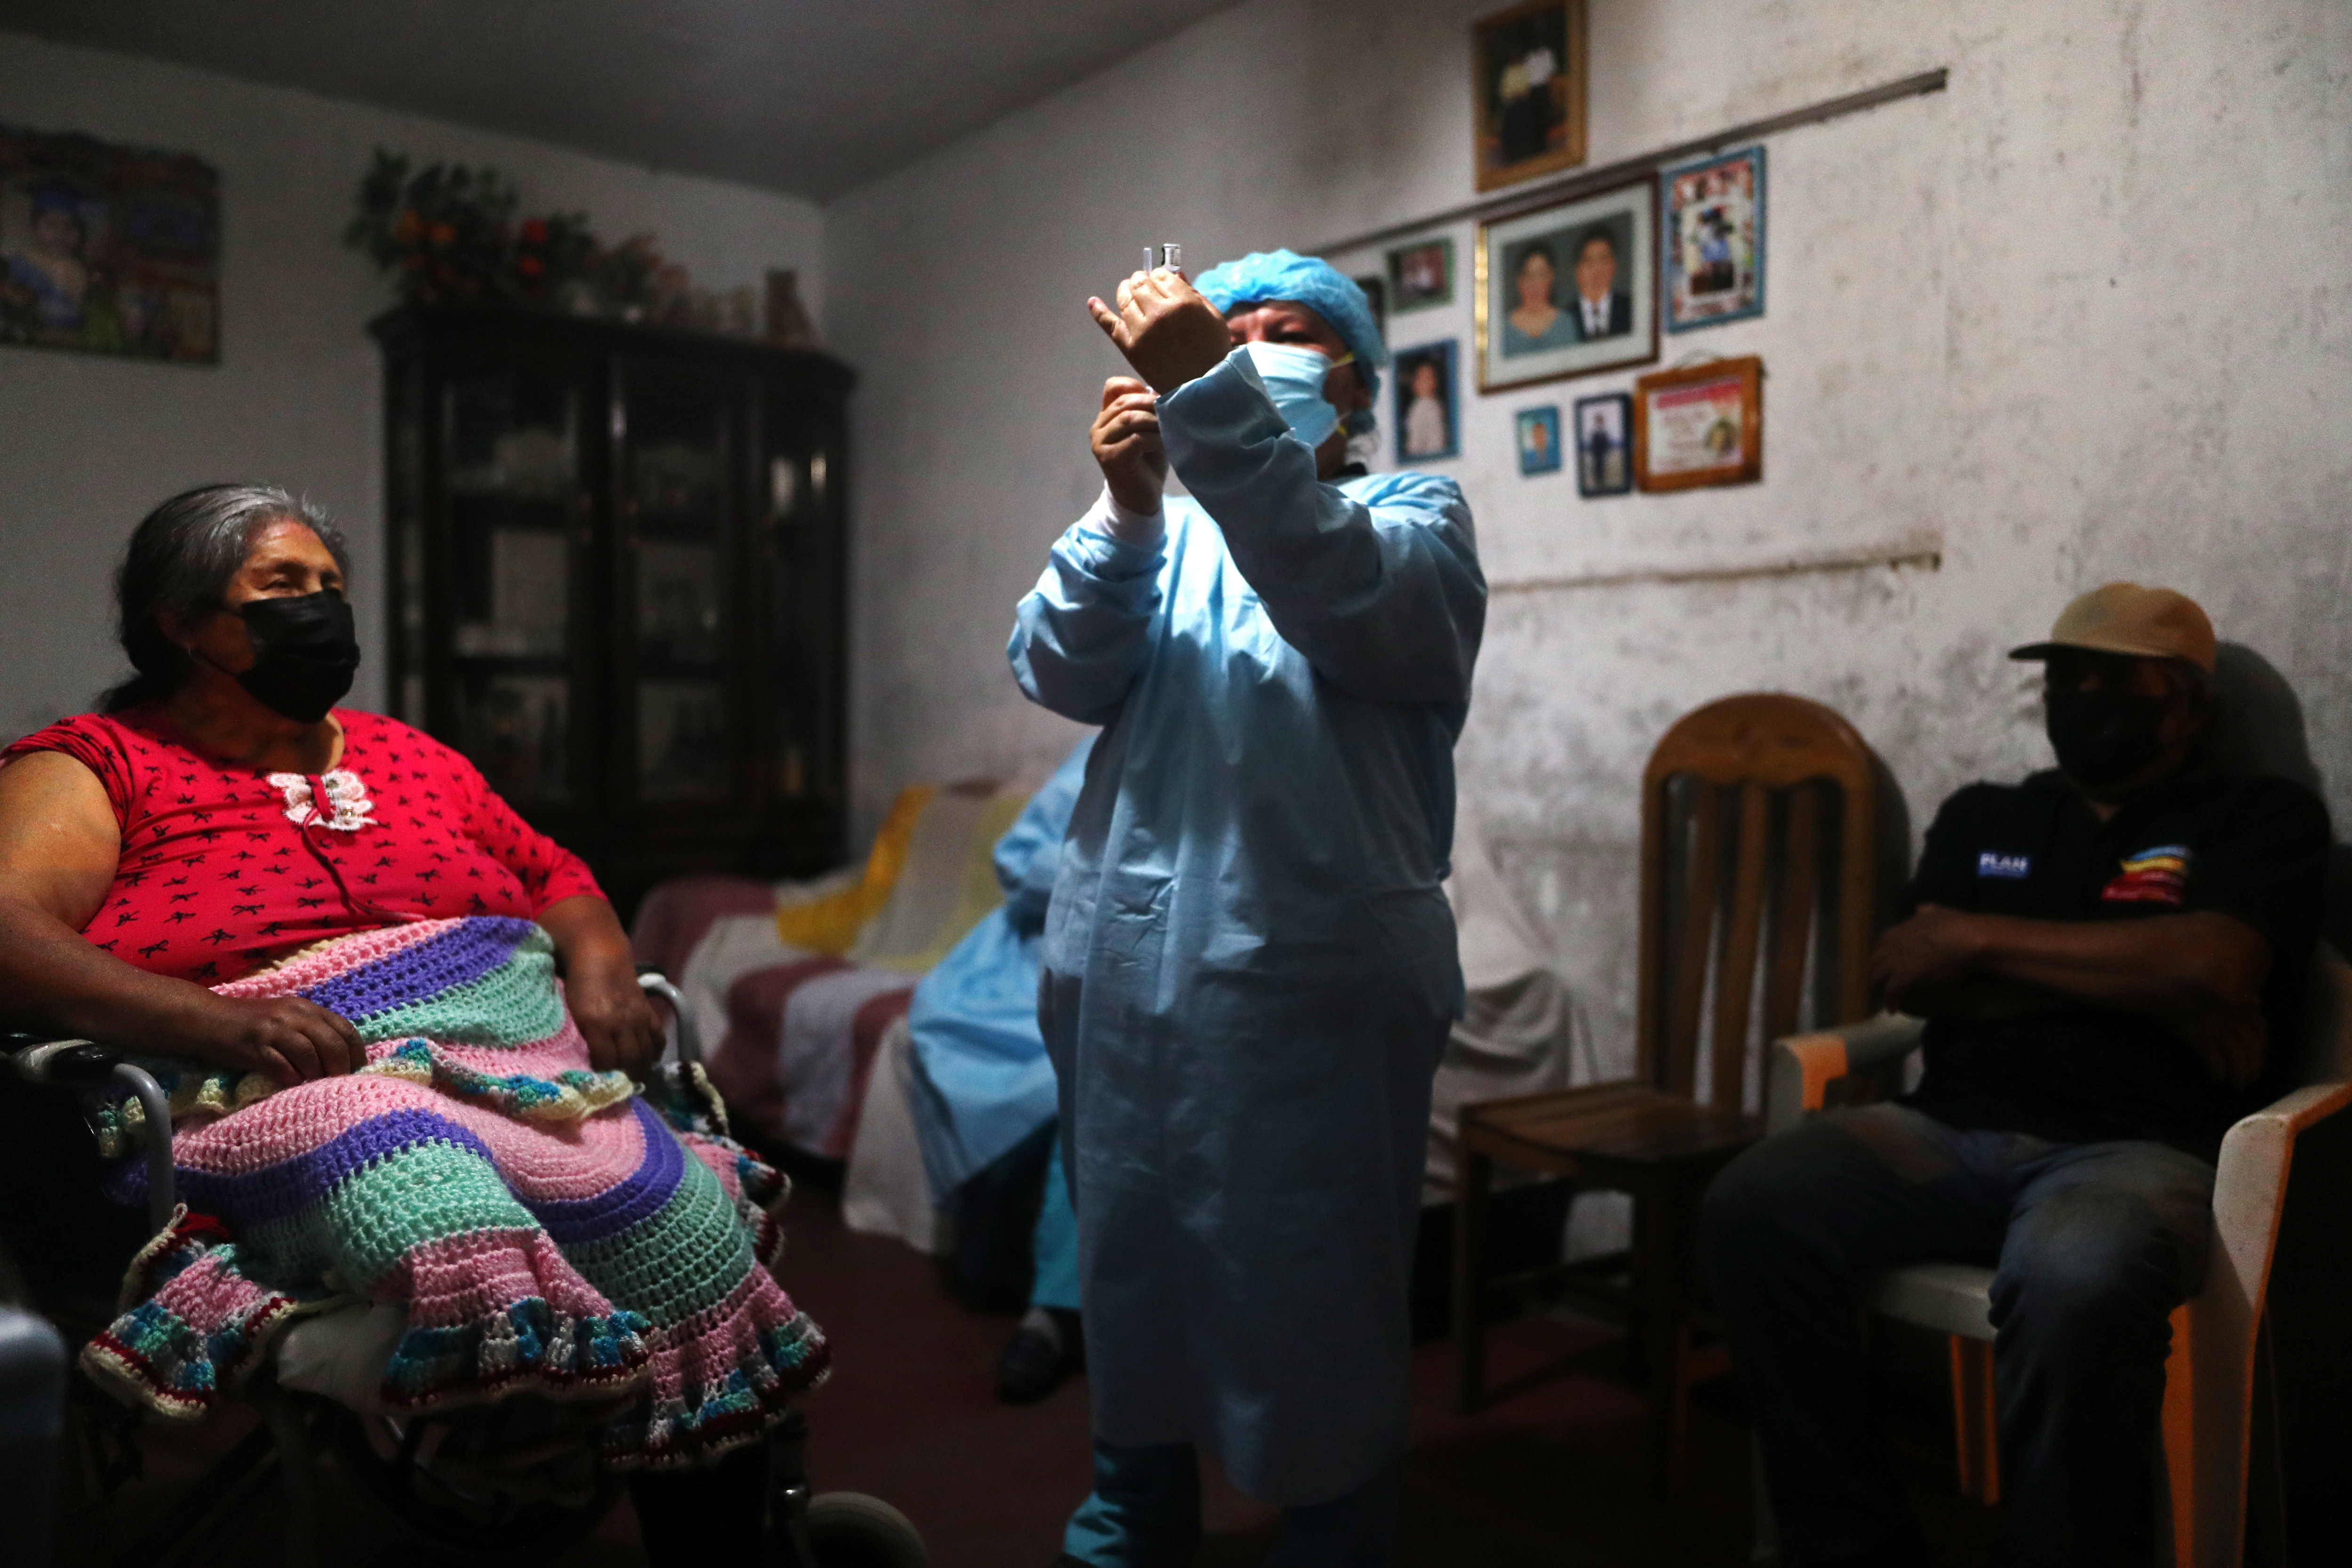 A healthcare worker administers a dose of the Pfizer-BioNTech coronavirus disease (COVID-19) vaccine to a woman during an initiative to vaccinate people over 12 years old, in Lima, Peru December 6, 2021. REUTERS/Sebastian Castaneda 